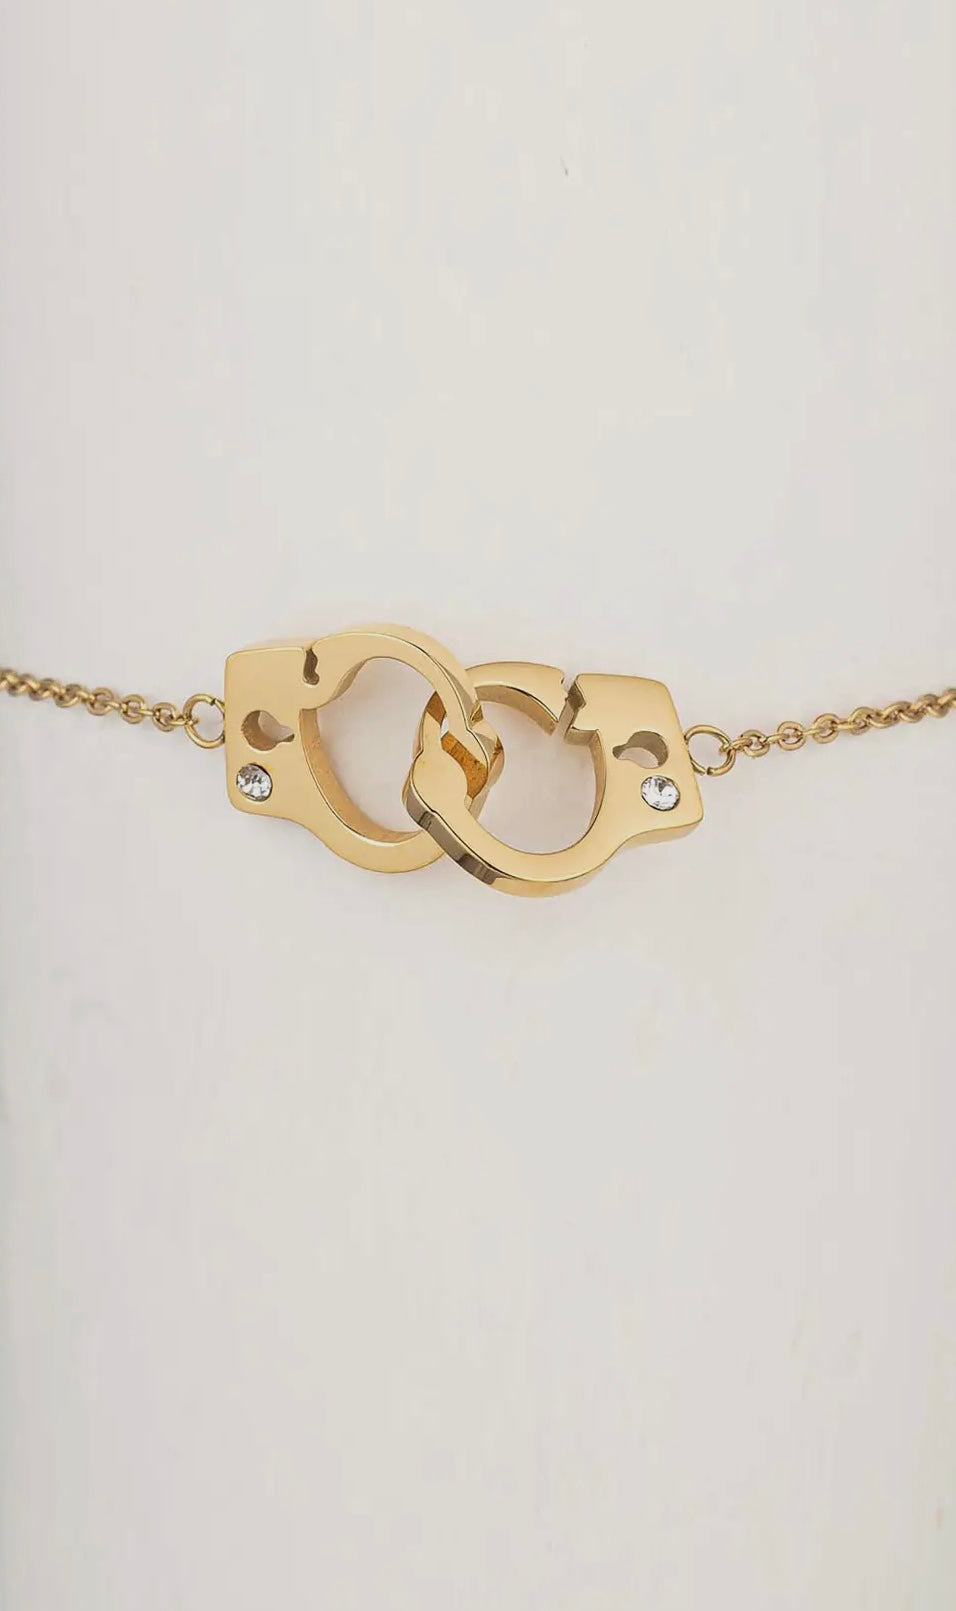 Gold Handcuff Bracelet with Crystals